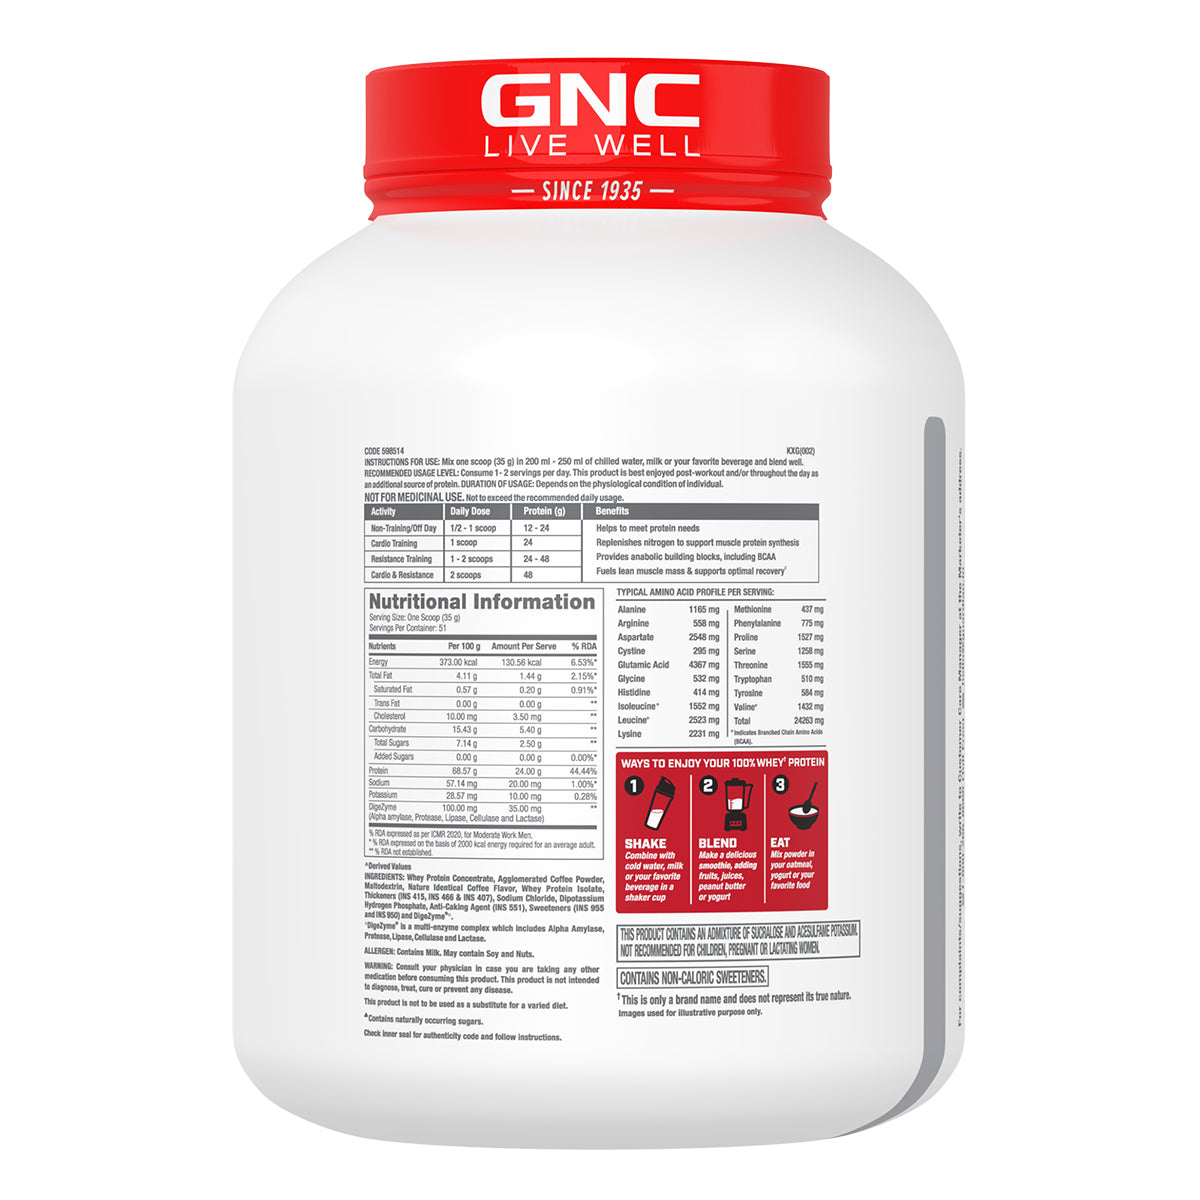 GNC Pro Performance 100% Whey Protein 4 lbs with Gym Kit - Faster Recovery & Lean Muscle Gains | Informed Choice Certified